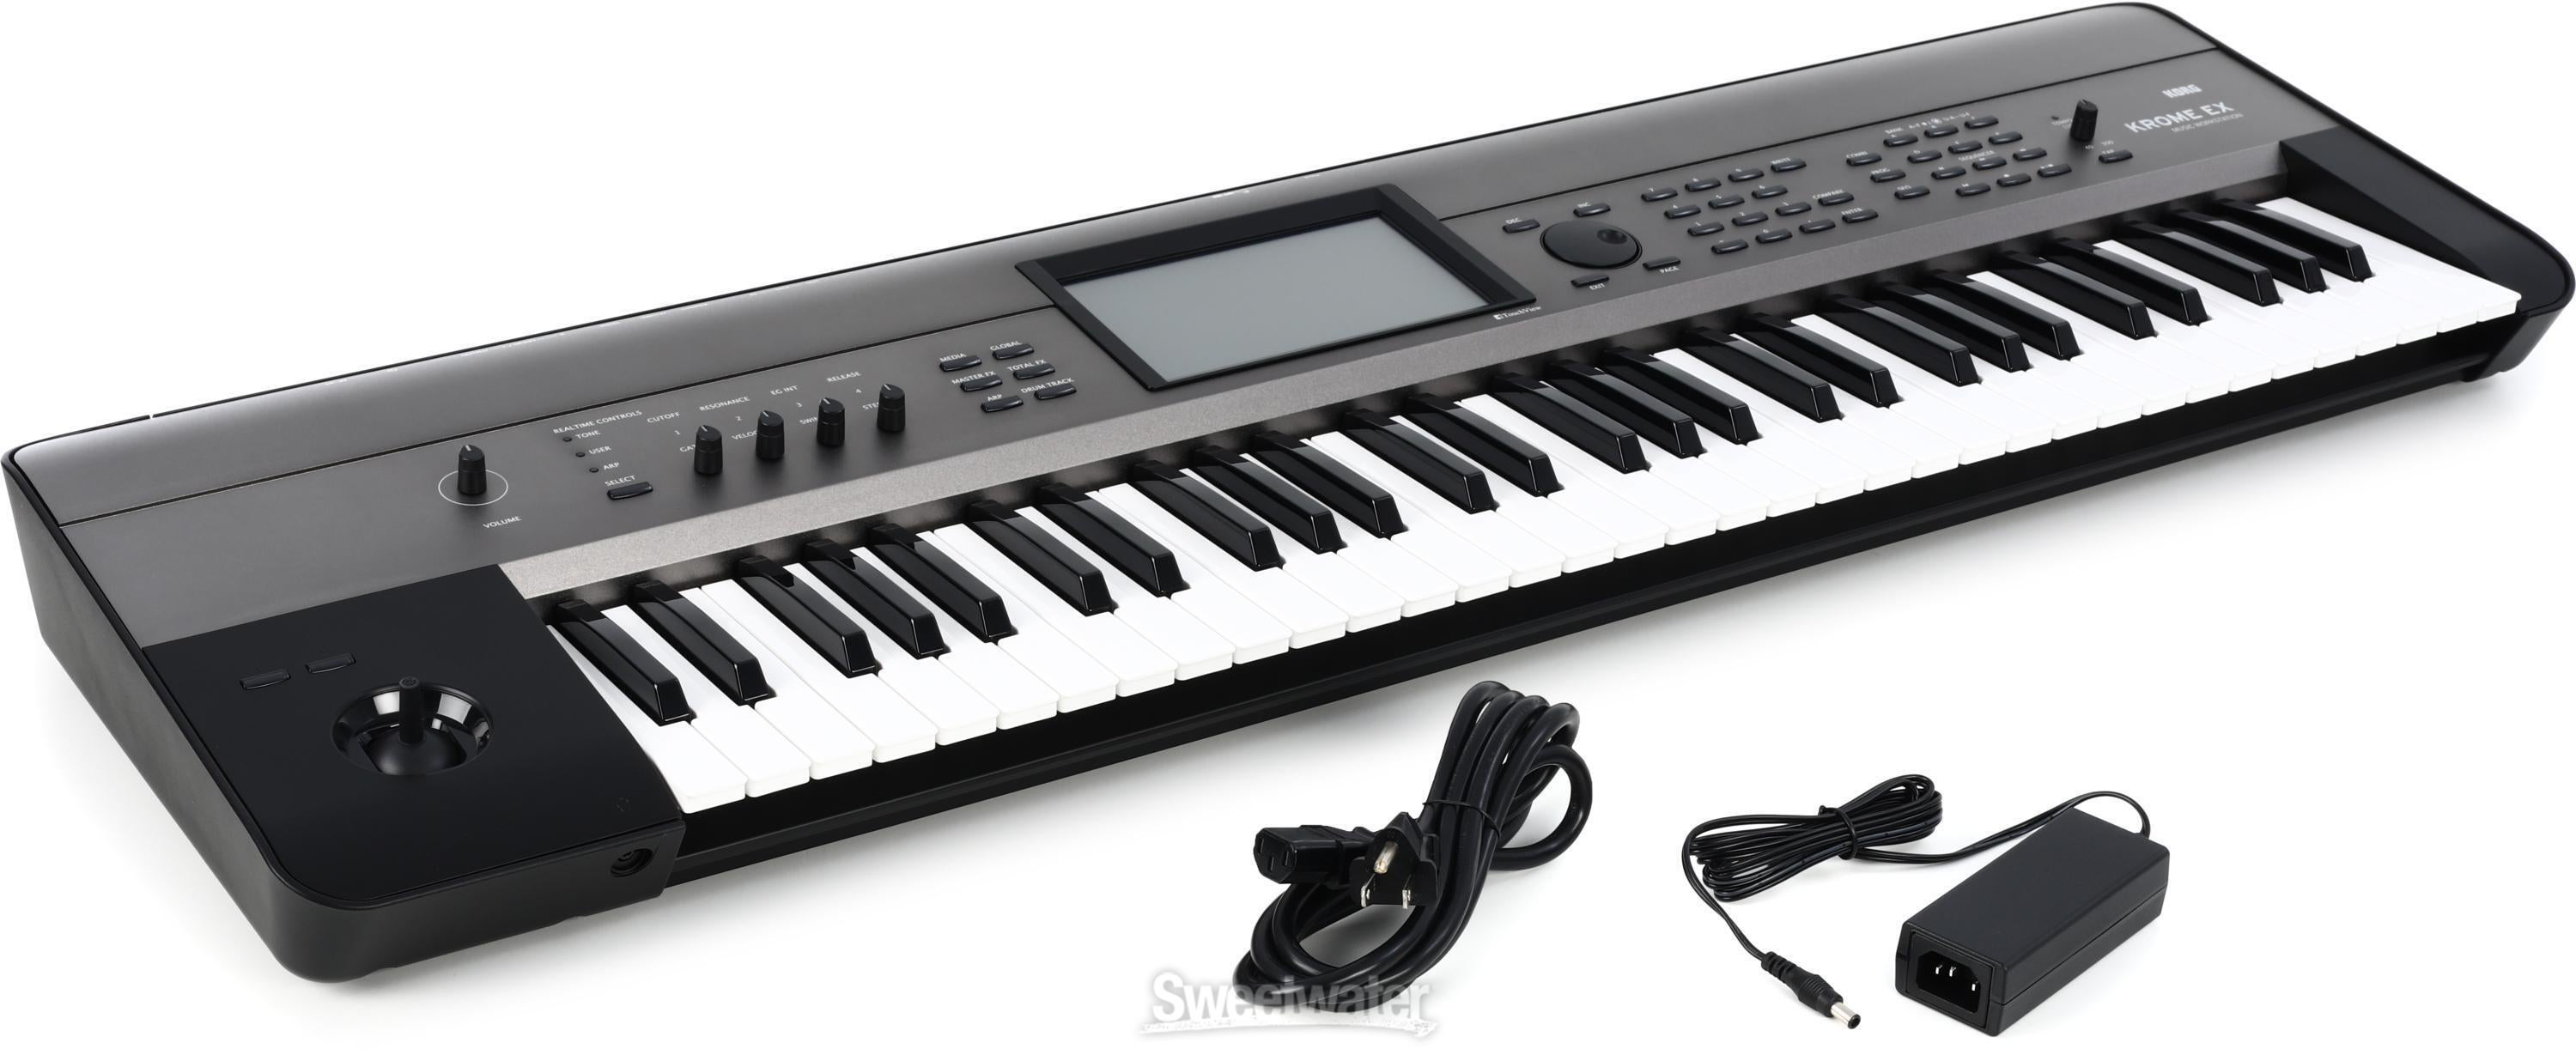 Korg Krome EX 61-key Synthesizer Workstation Reviews | Sweetwater